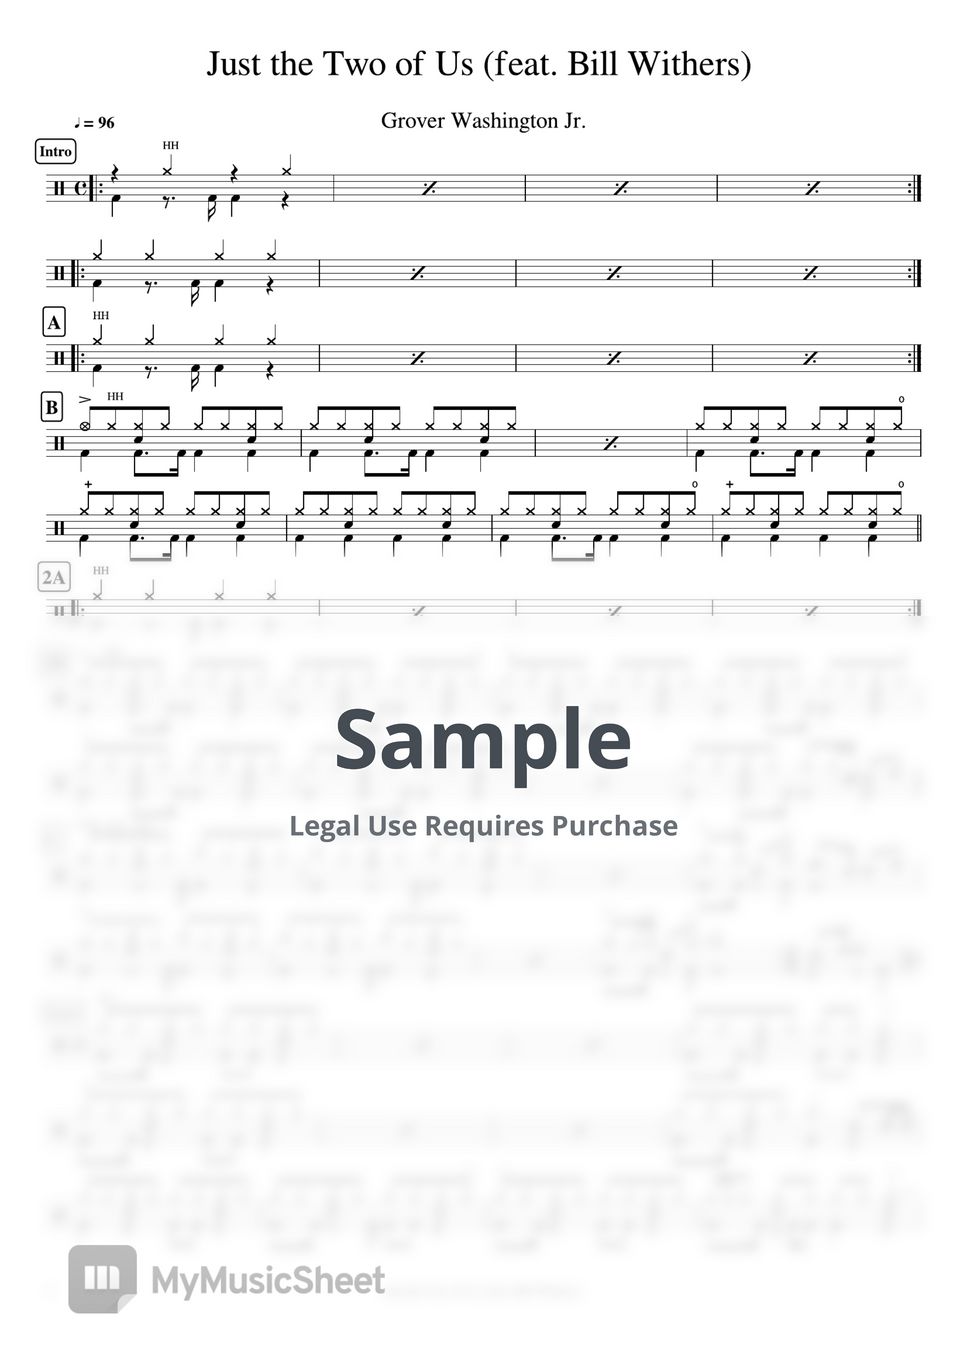 Grover Washington Jr. - Just the Two of Us (feat. Bill Withers) by Cookai's J-pop Drum sheet music!!!